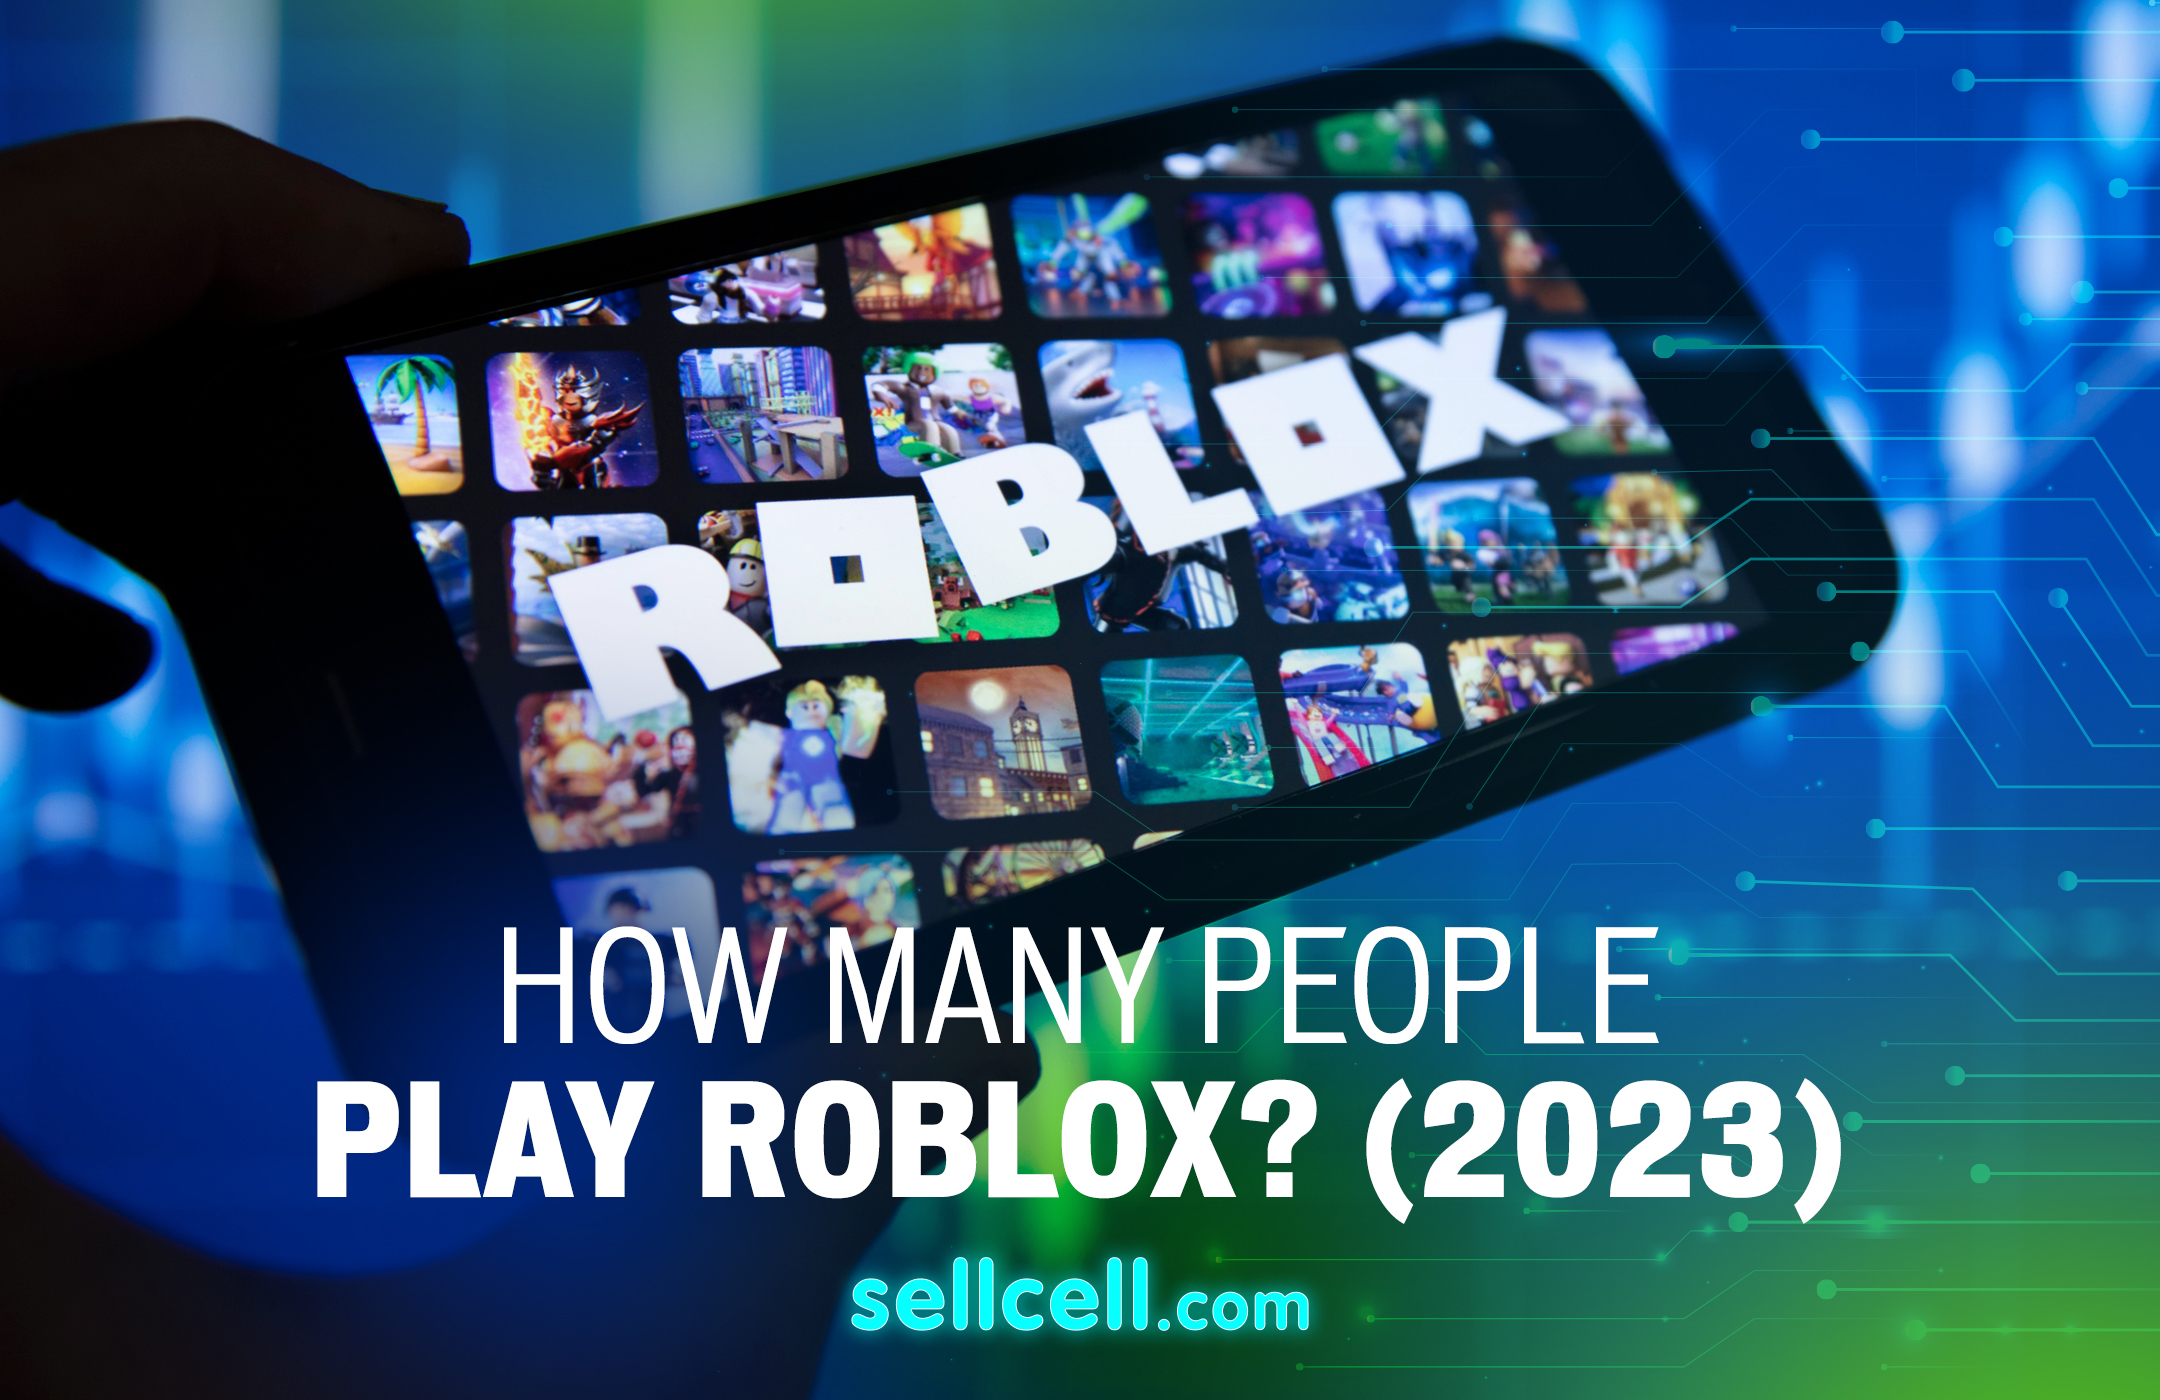 How Many People Play Roblox? Roblox Statistics (2023) -  Blog